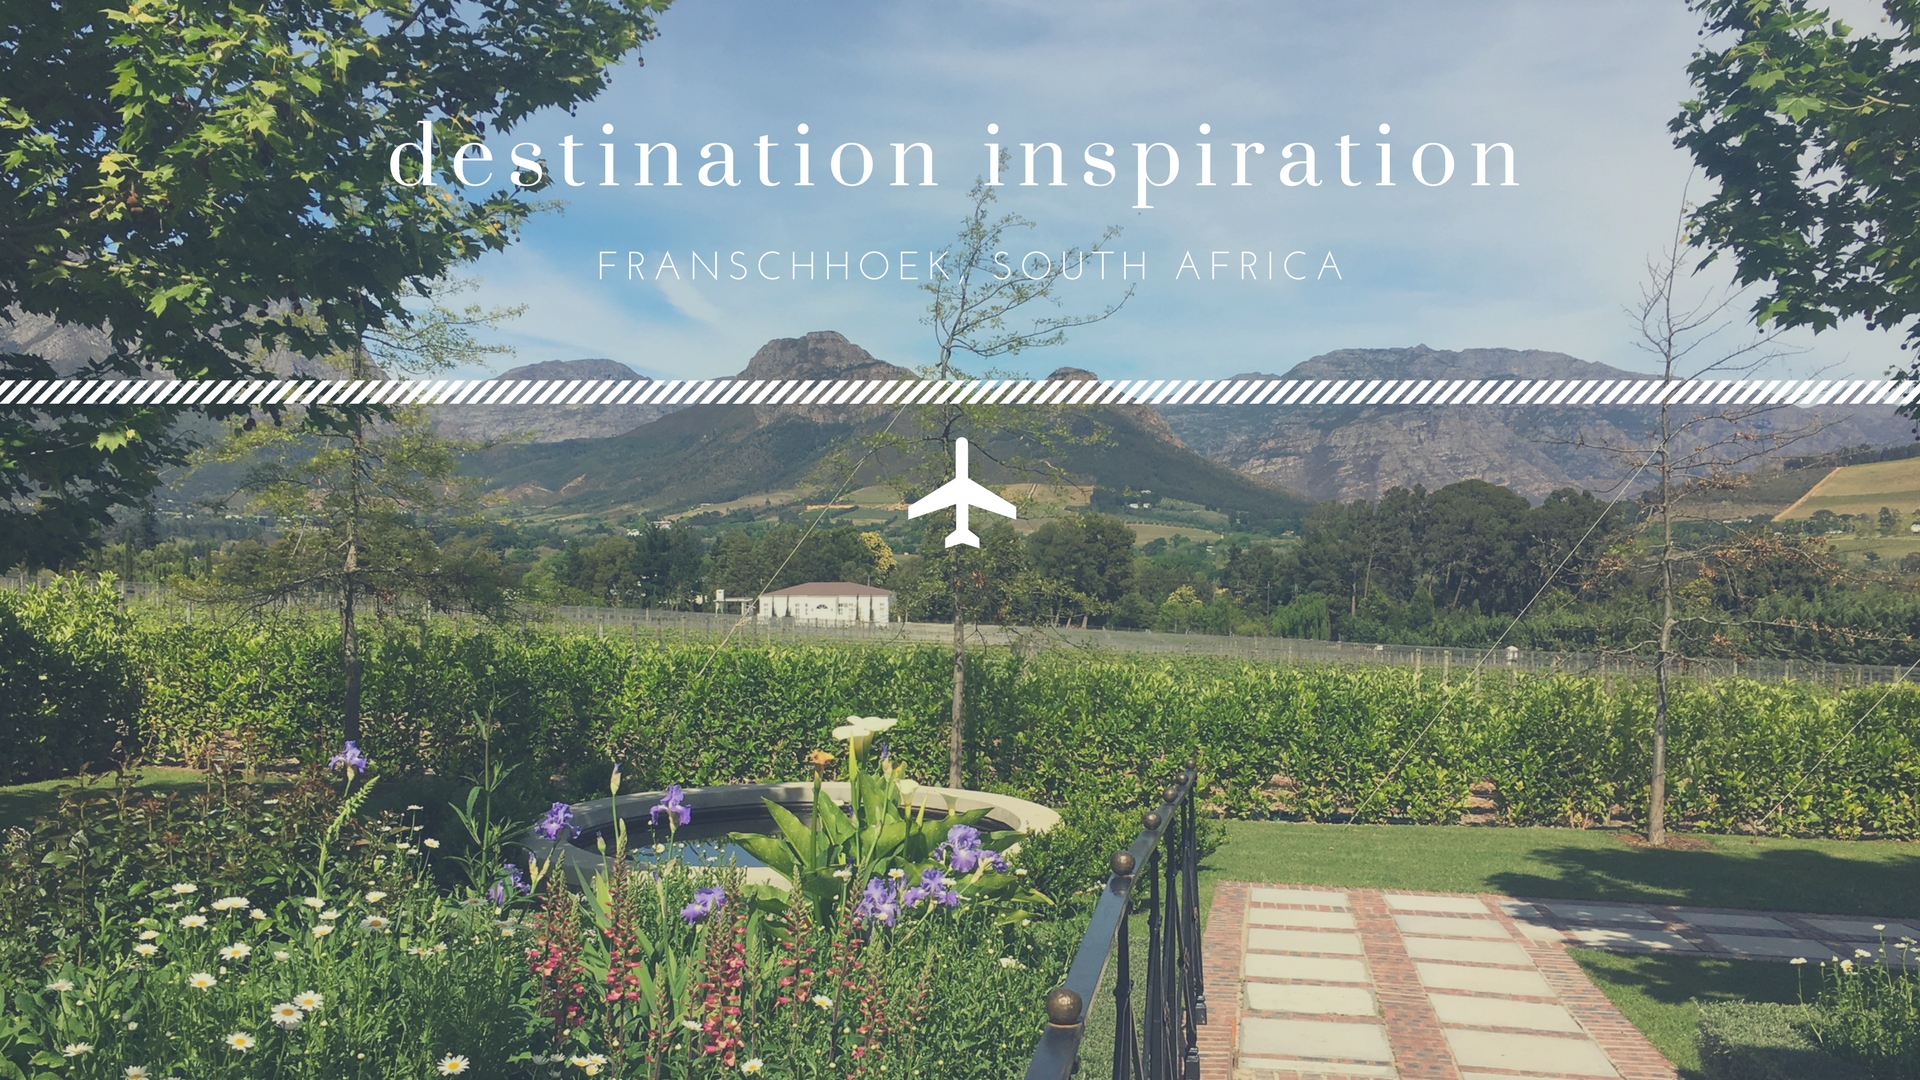 HOTEL INSIDER: A Stay at Akademie Guest House, Franschhoek